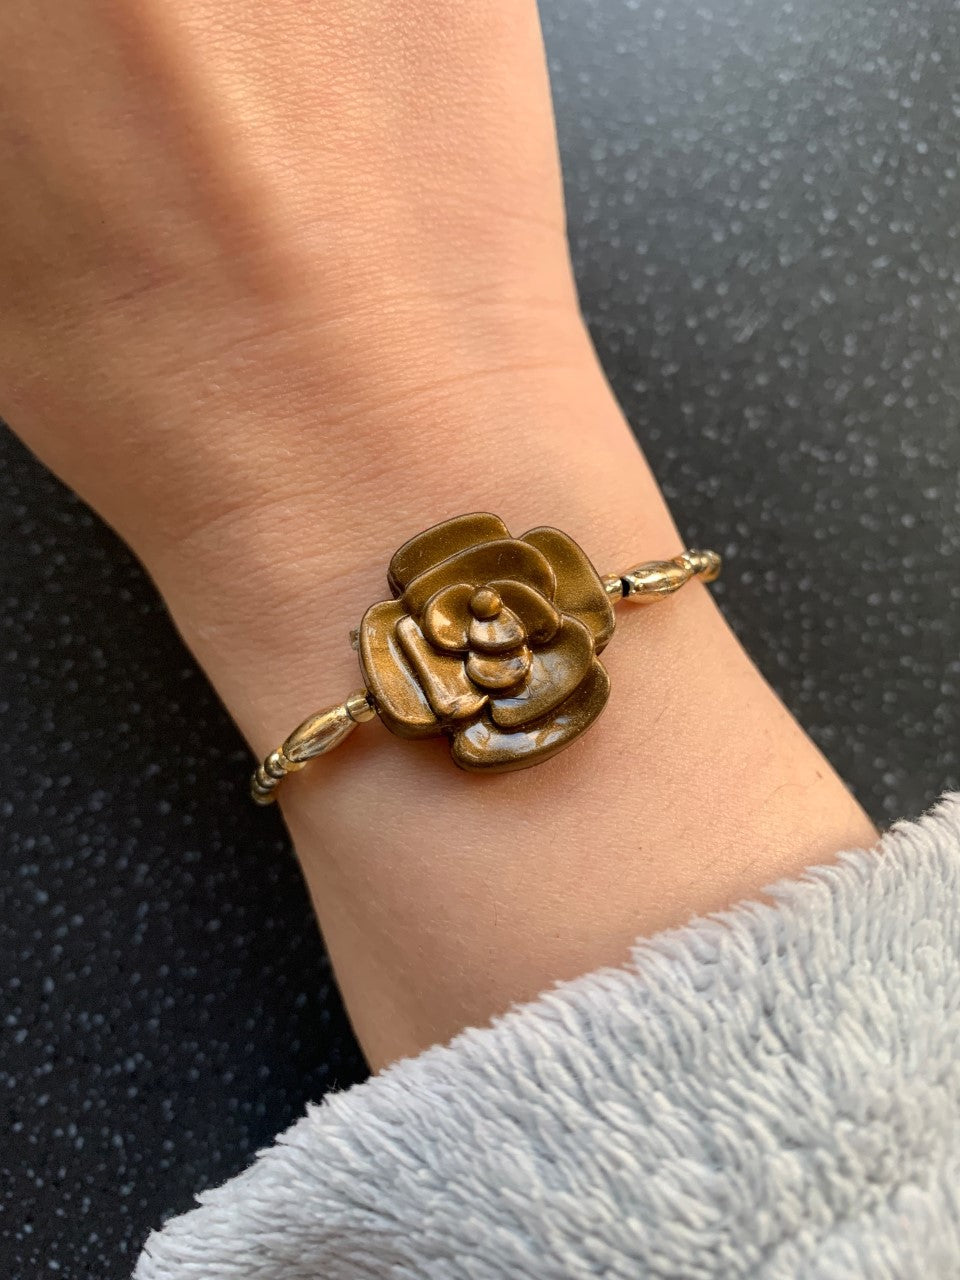 Protect The Love Connection Intention Tie Manifesting Bracelet Gold Flower for Boosting Love & Providing Protection To The Connection